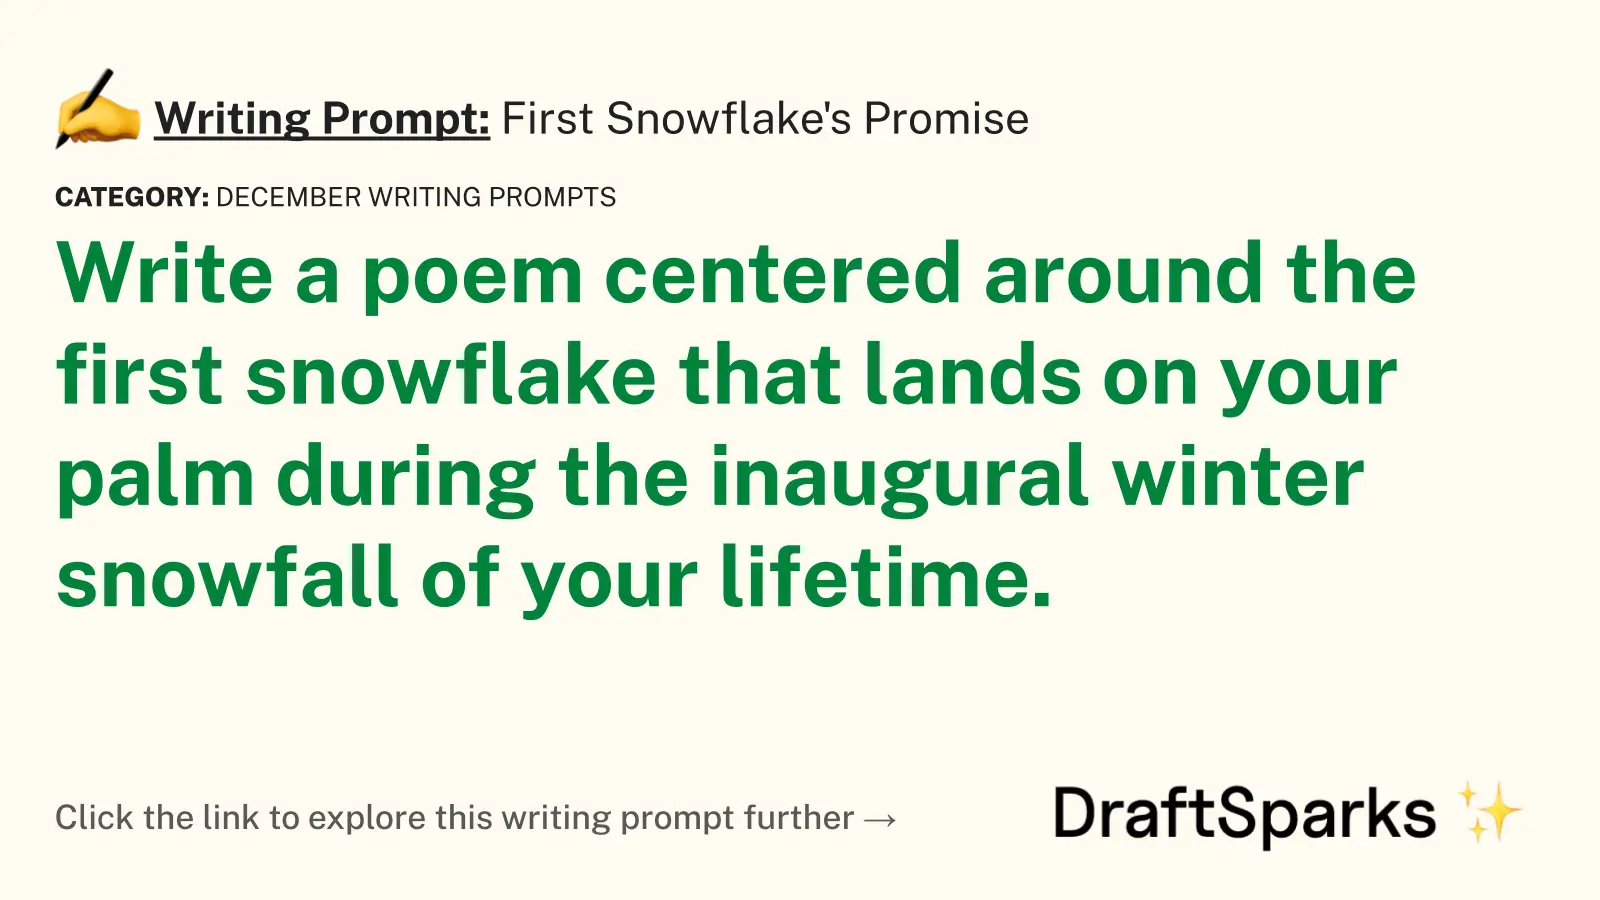 First Snowflake’s Promise